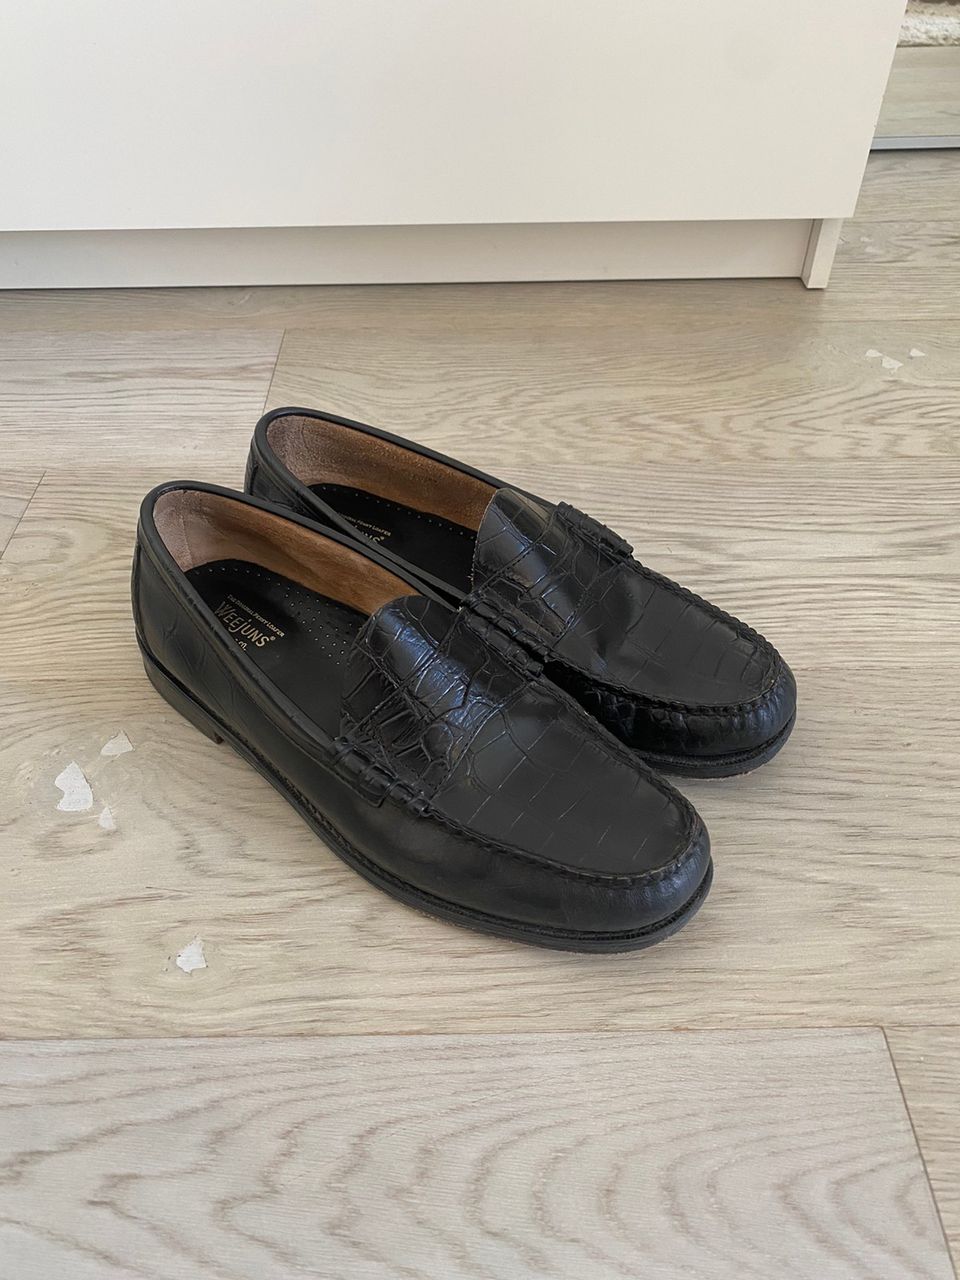 G.H. Bass Weejuns penny loafers